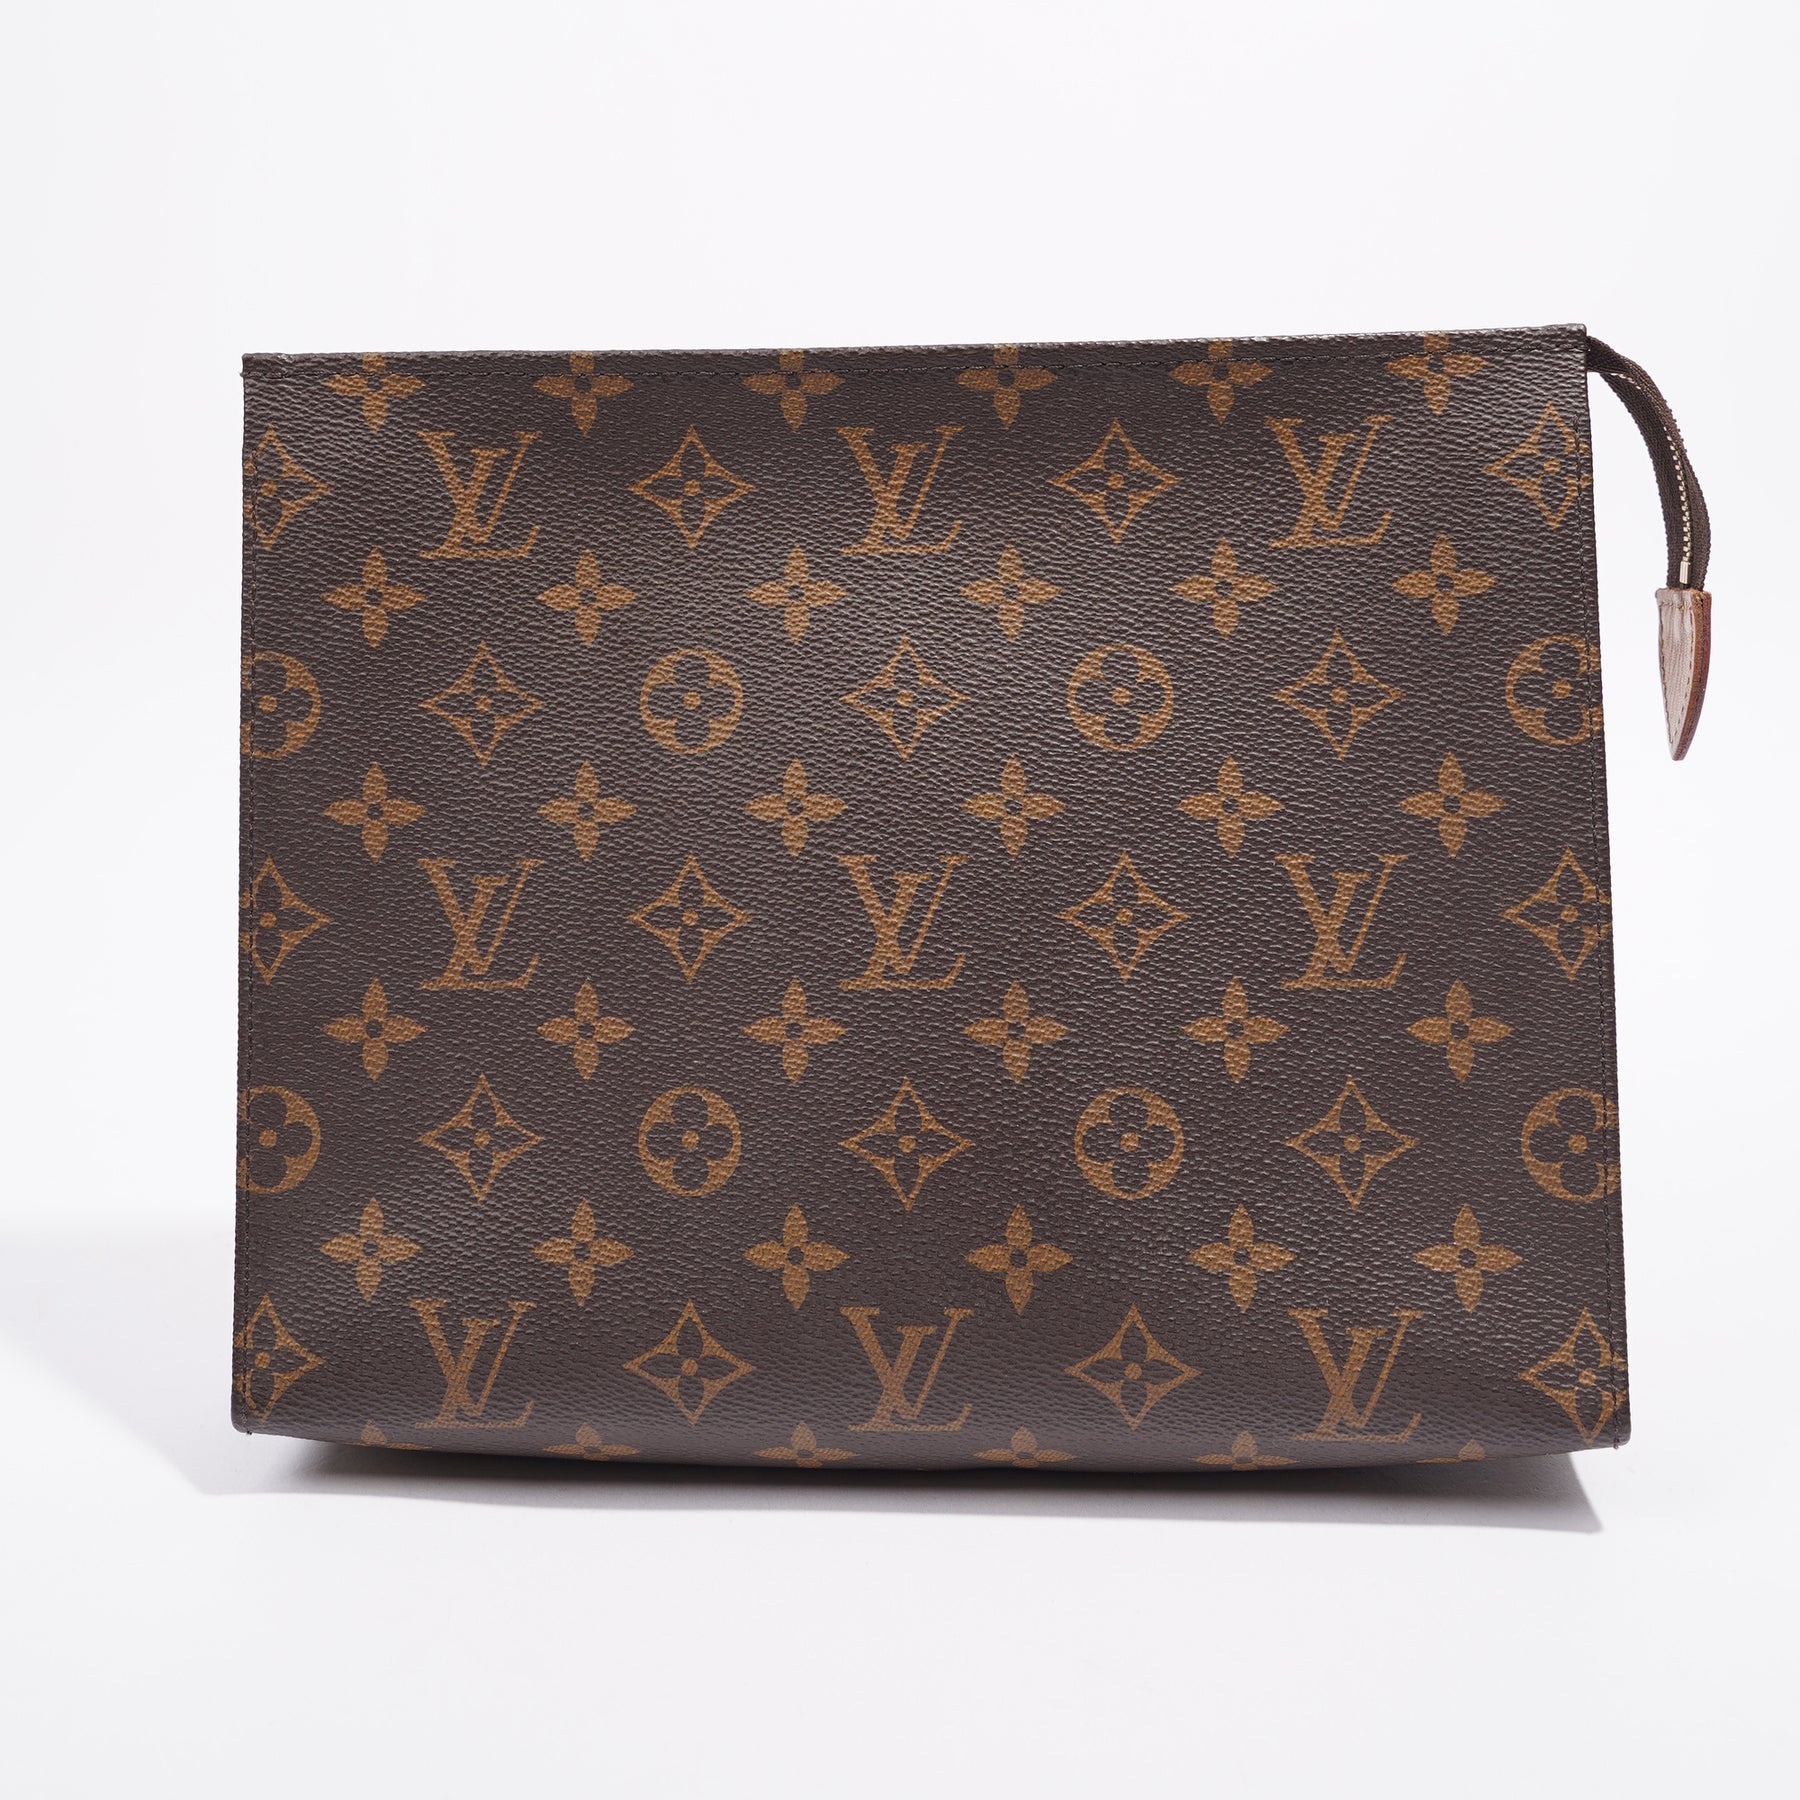 March Madness - Share your LV purchases here!  Louis vuitton, Louis  vuitton neonoe, Louis vuitton bag outfit